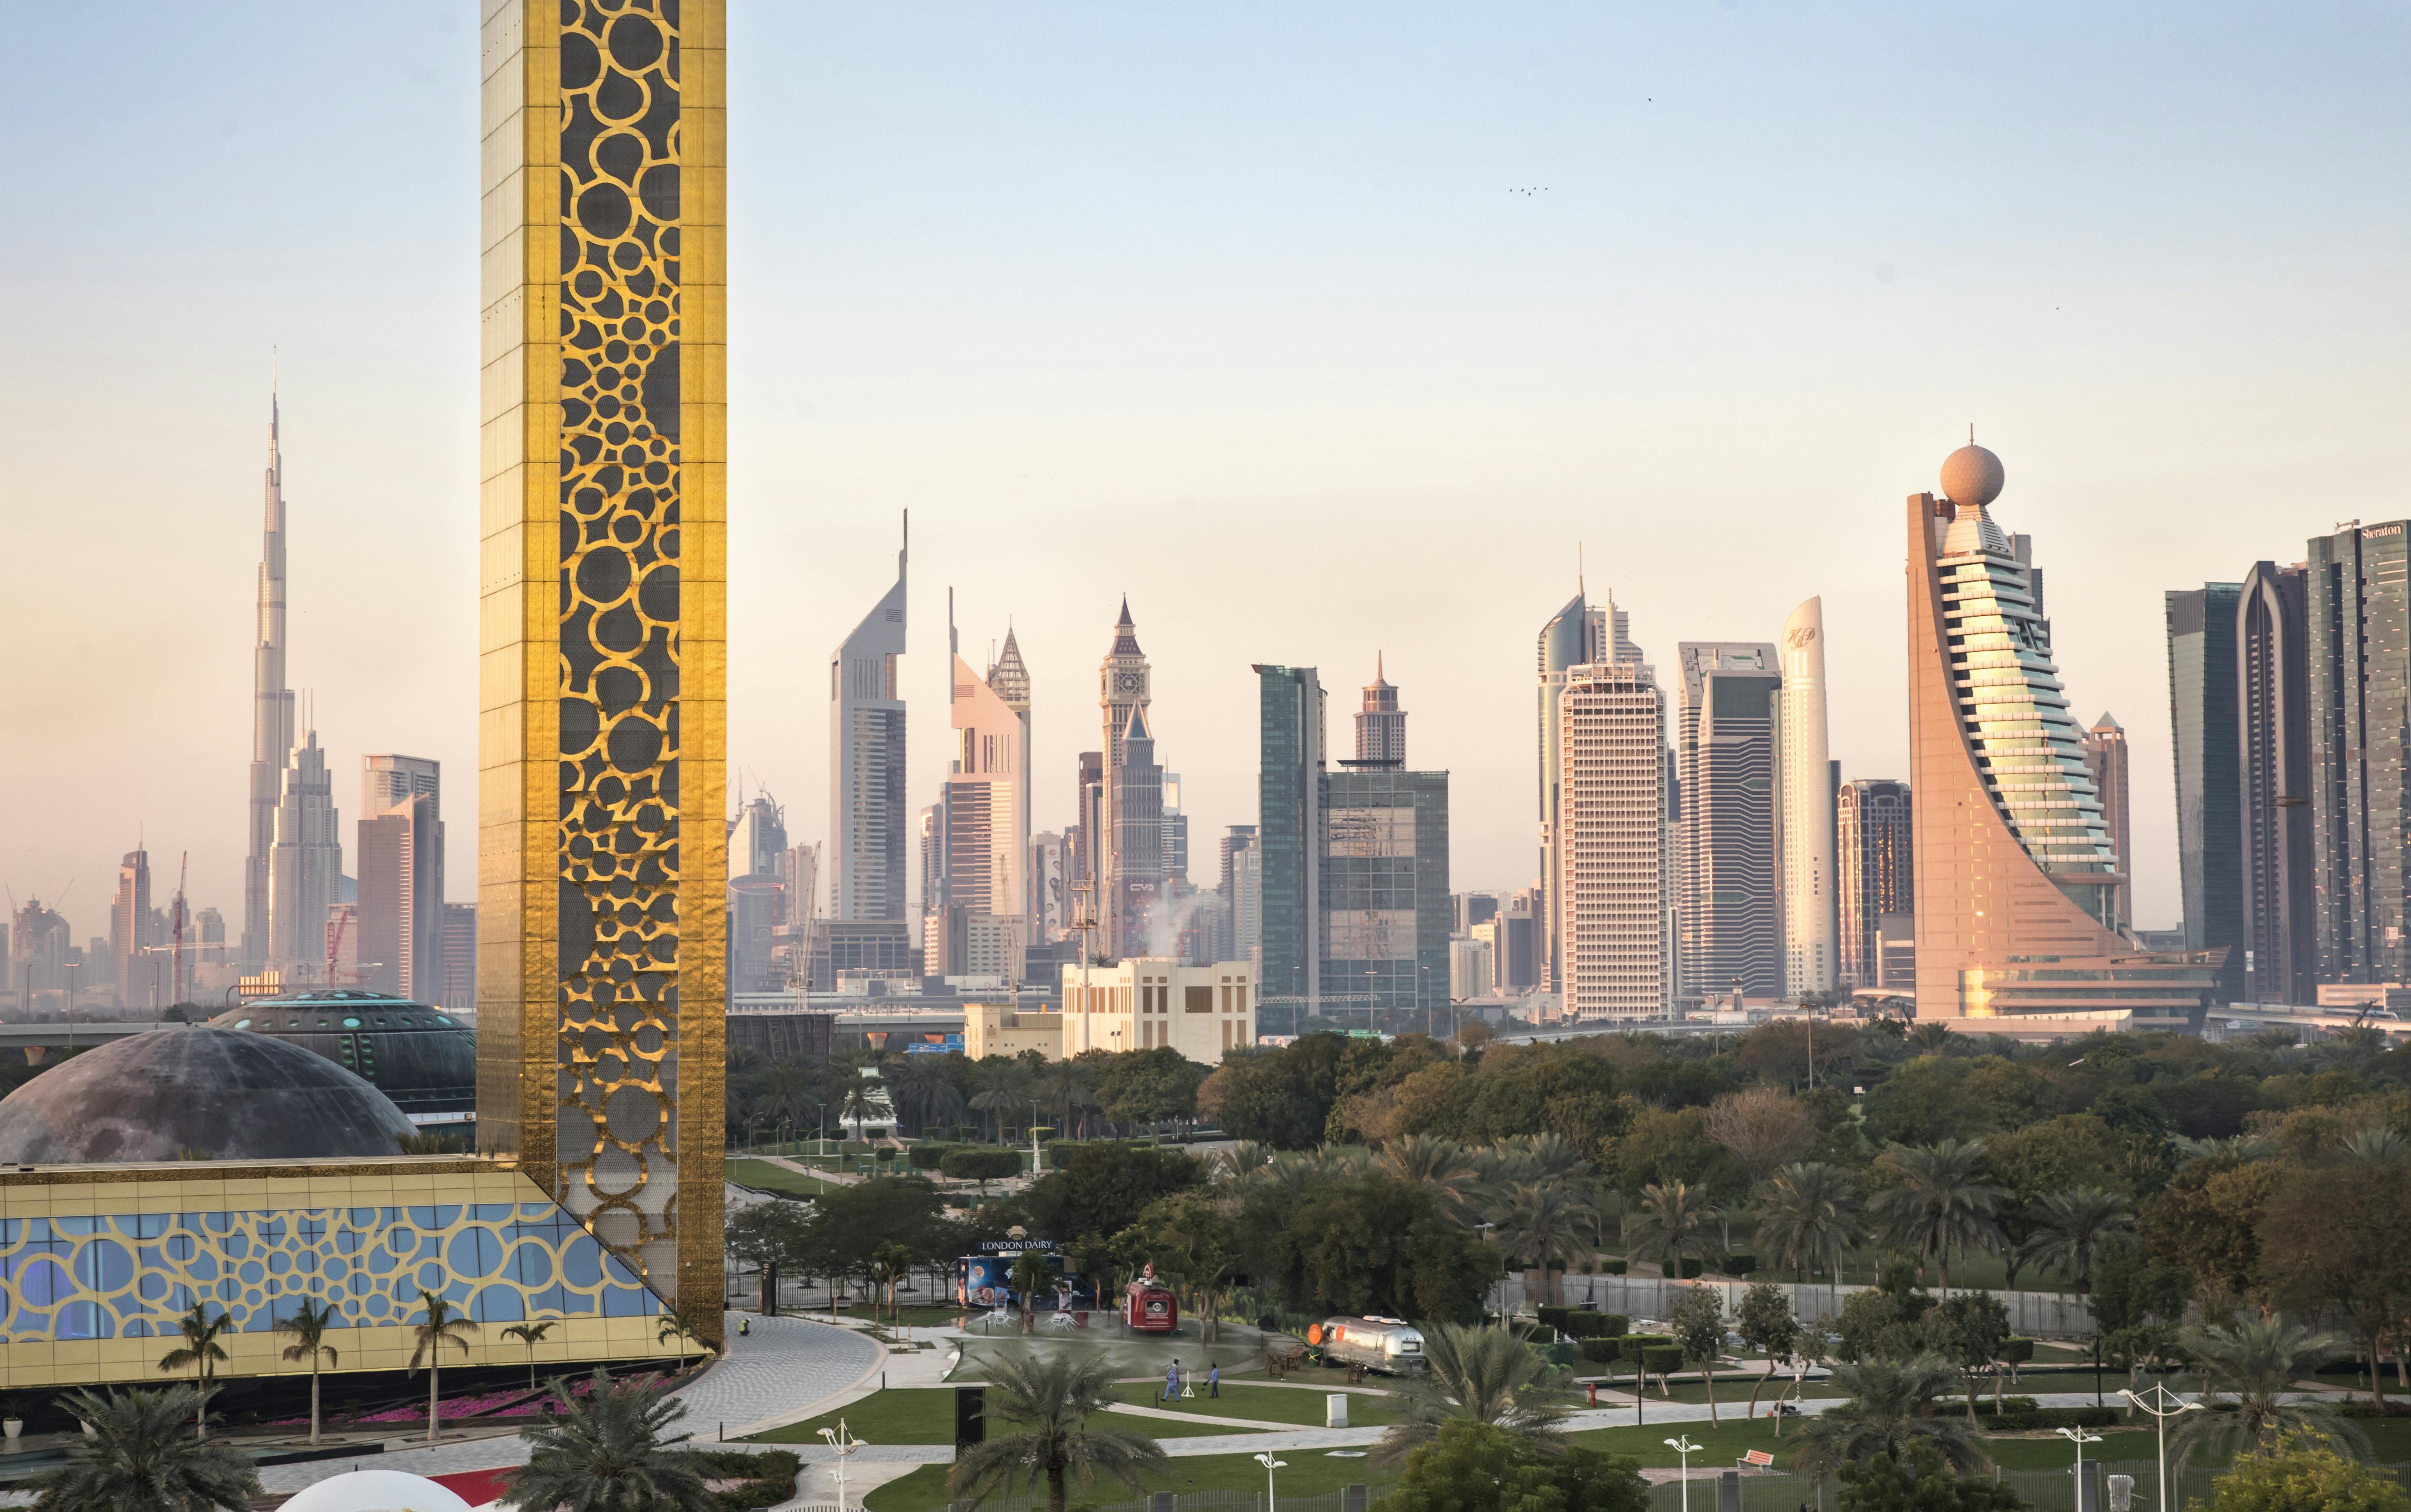 Dubai frame tickets with half-day sightseeing city tour